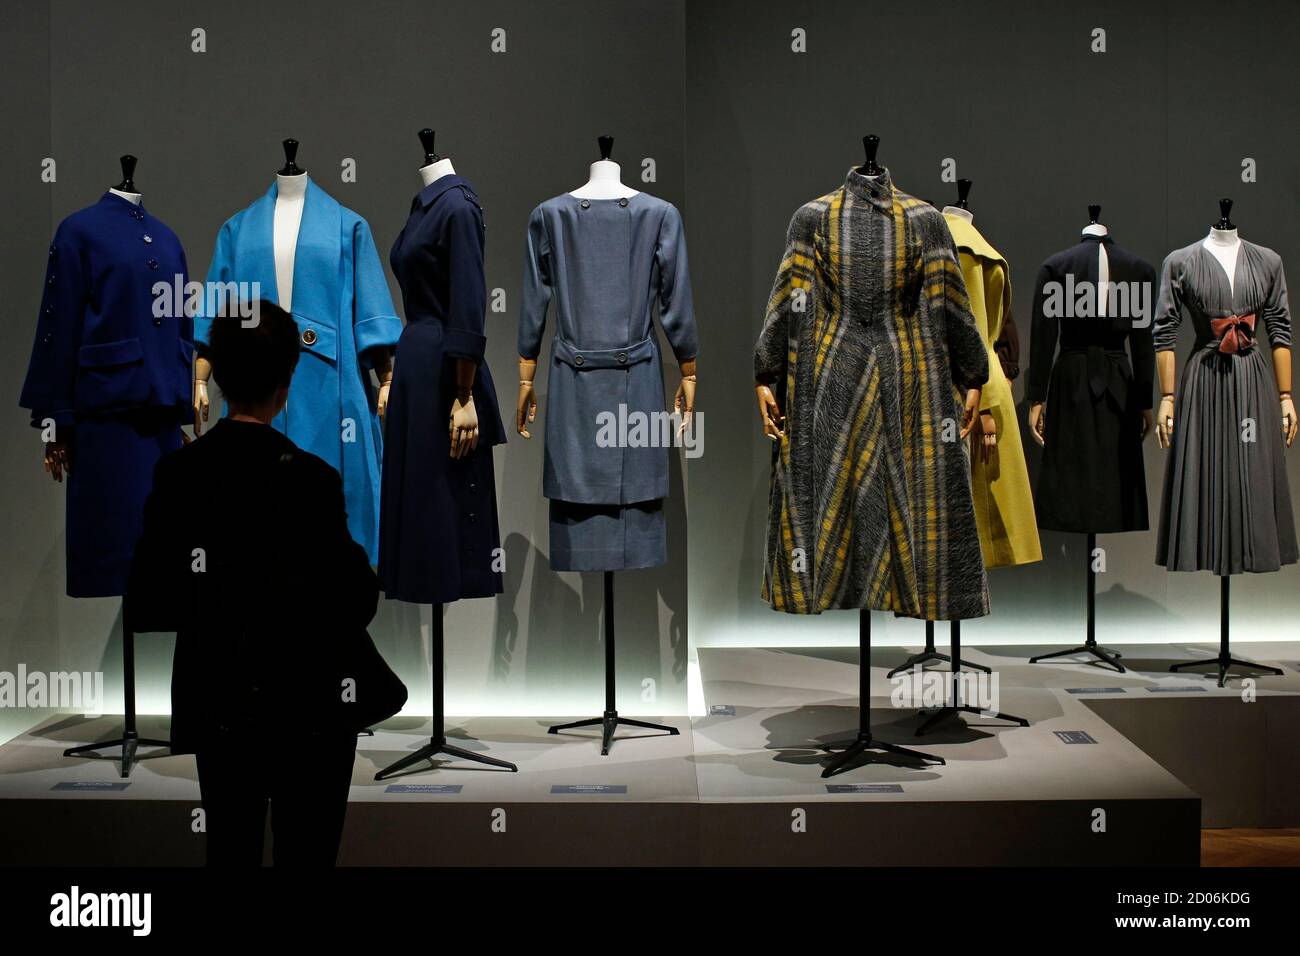 A visitor looks at vintage dresses by designers Marcel Rochas, Schiaparelli, Jeanne Lafaurie, Balenciaga, Gres, Madeleine Vramant, Jacques Fath and Pauline Trigere in exhibition "Les Annees 50, La mode en